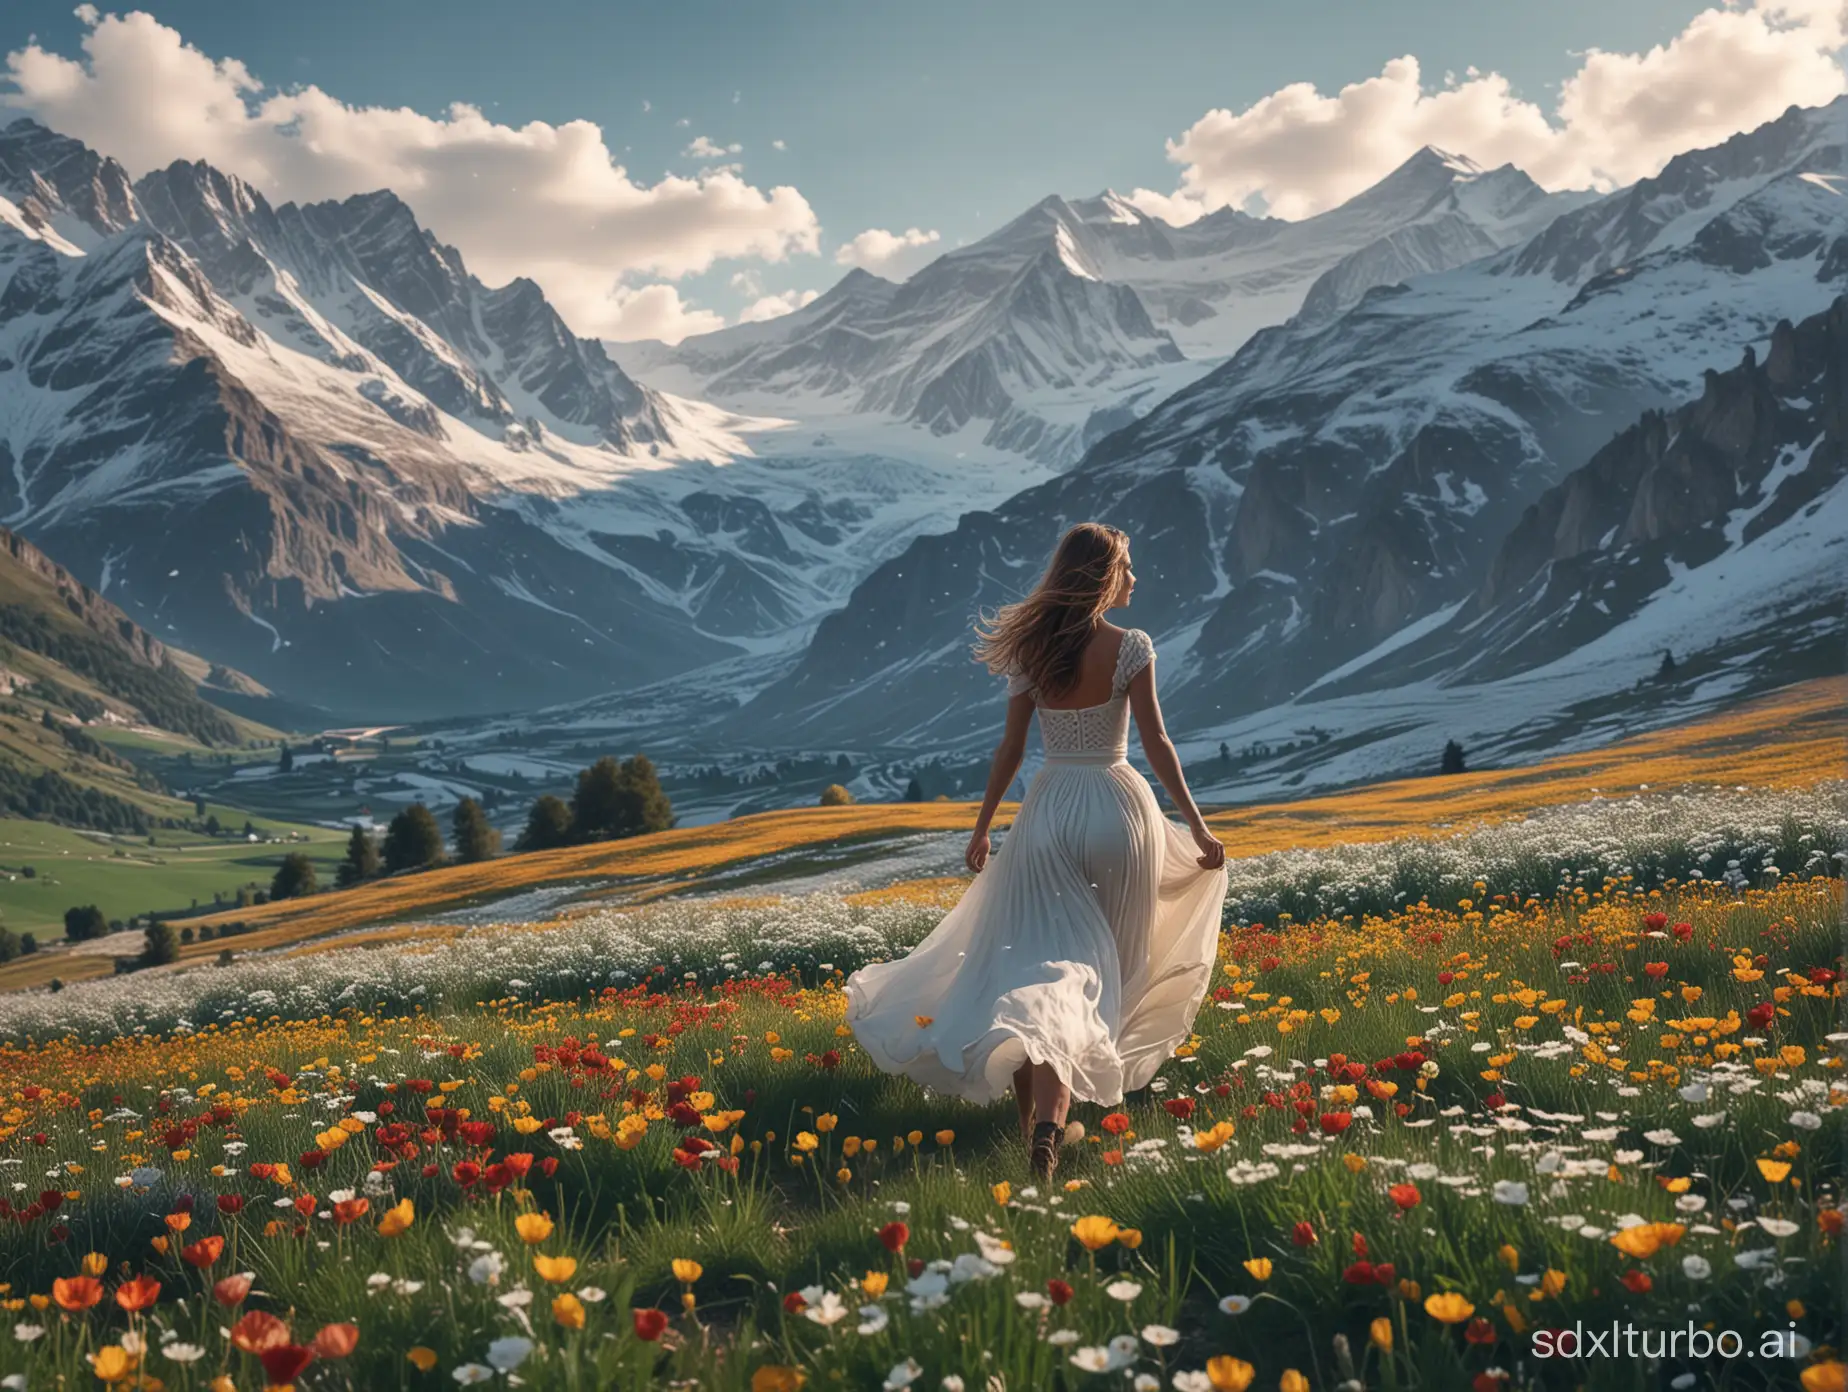 Under the majestic snow-capped mountains, amidst endless fields of flowers, a beautiful girl in a long skirt runs into the distance, captured by a telephoto lens, in 8K wallpaper quality, the picture full of detail, an unparalleled beauty.